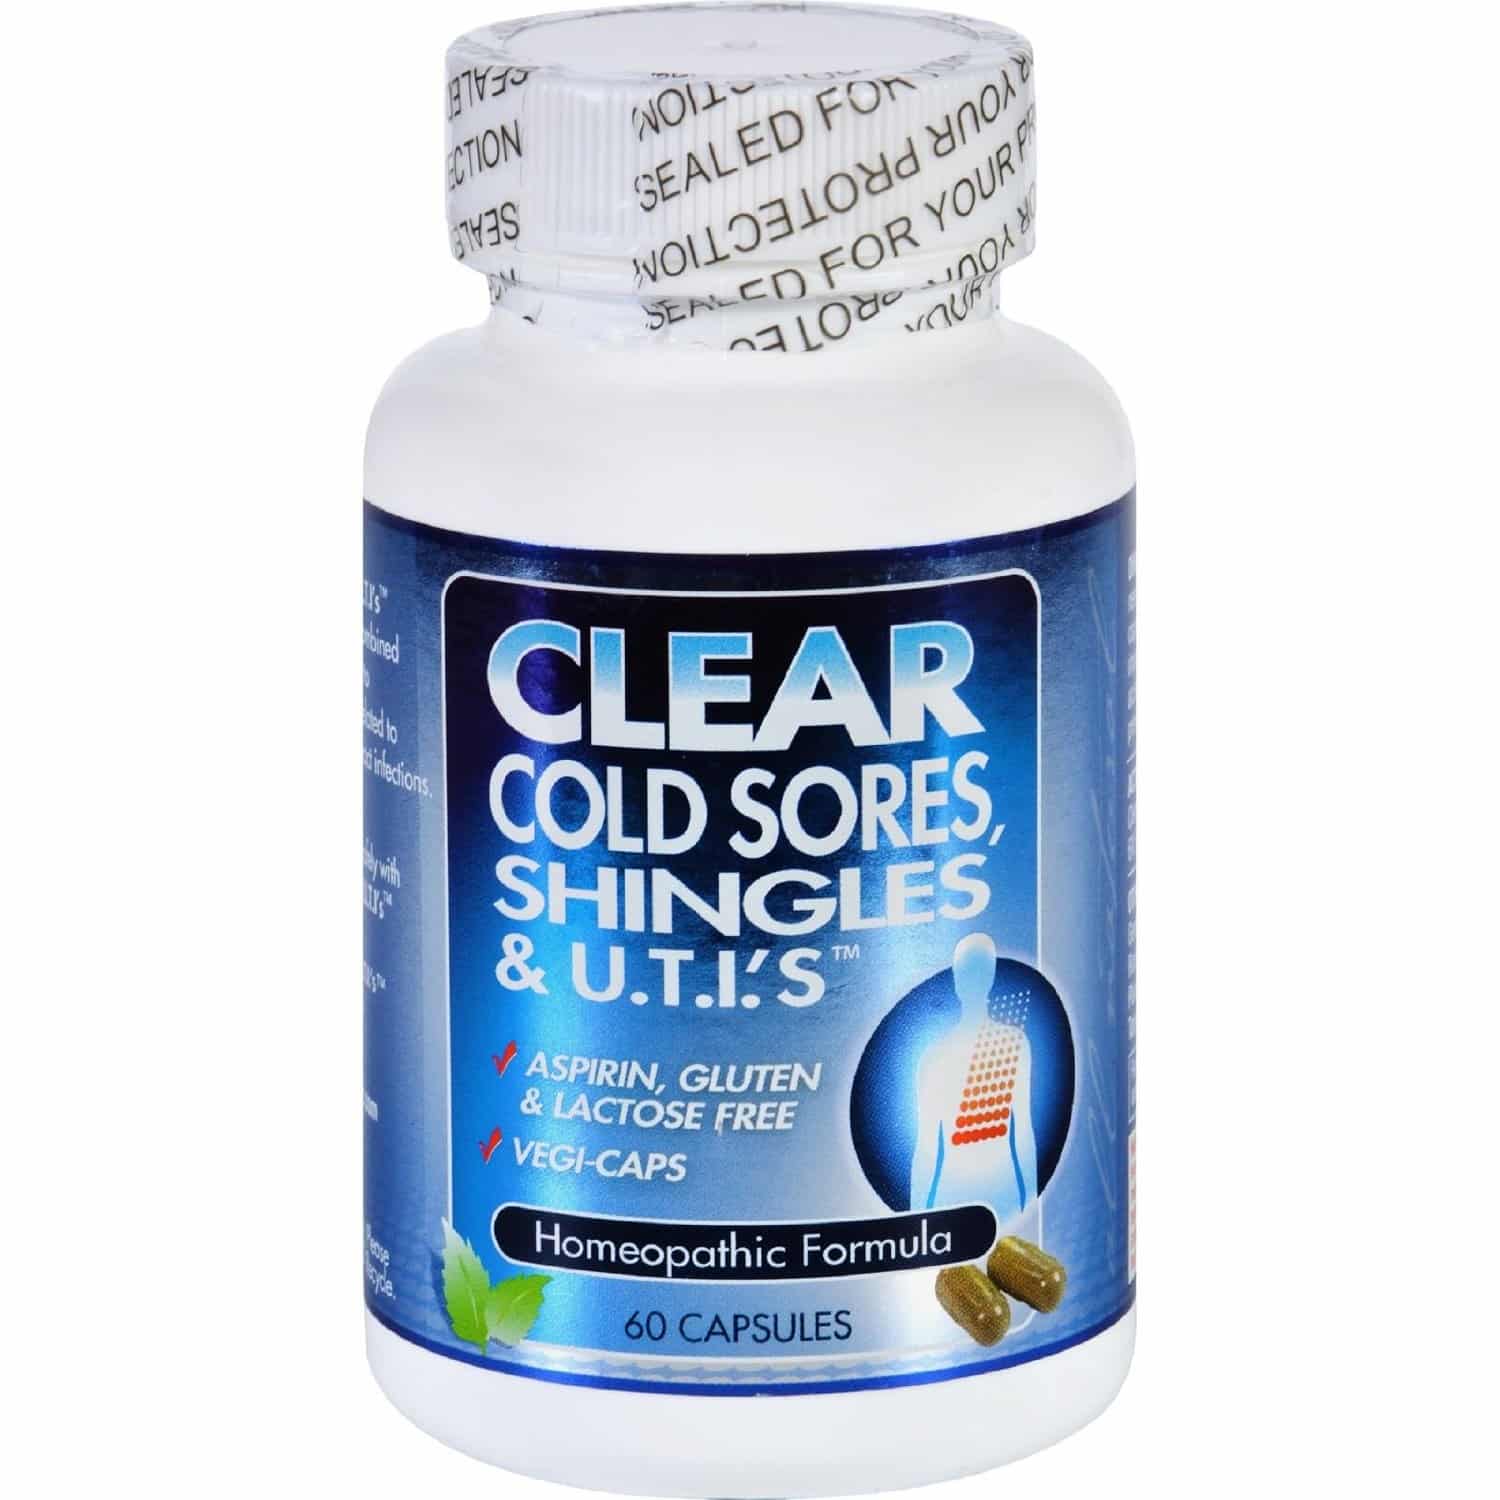 Clear Products Clear S.H.U.T.I. Shingles Relief, 60 Ct